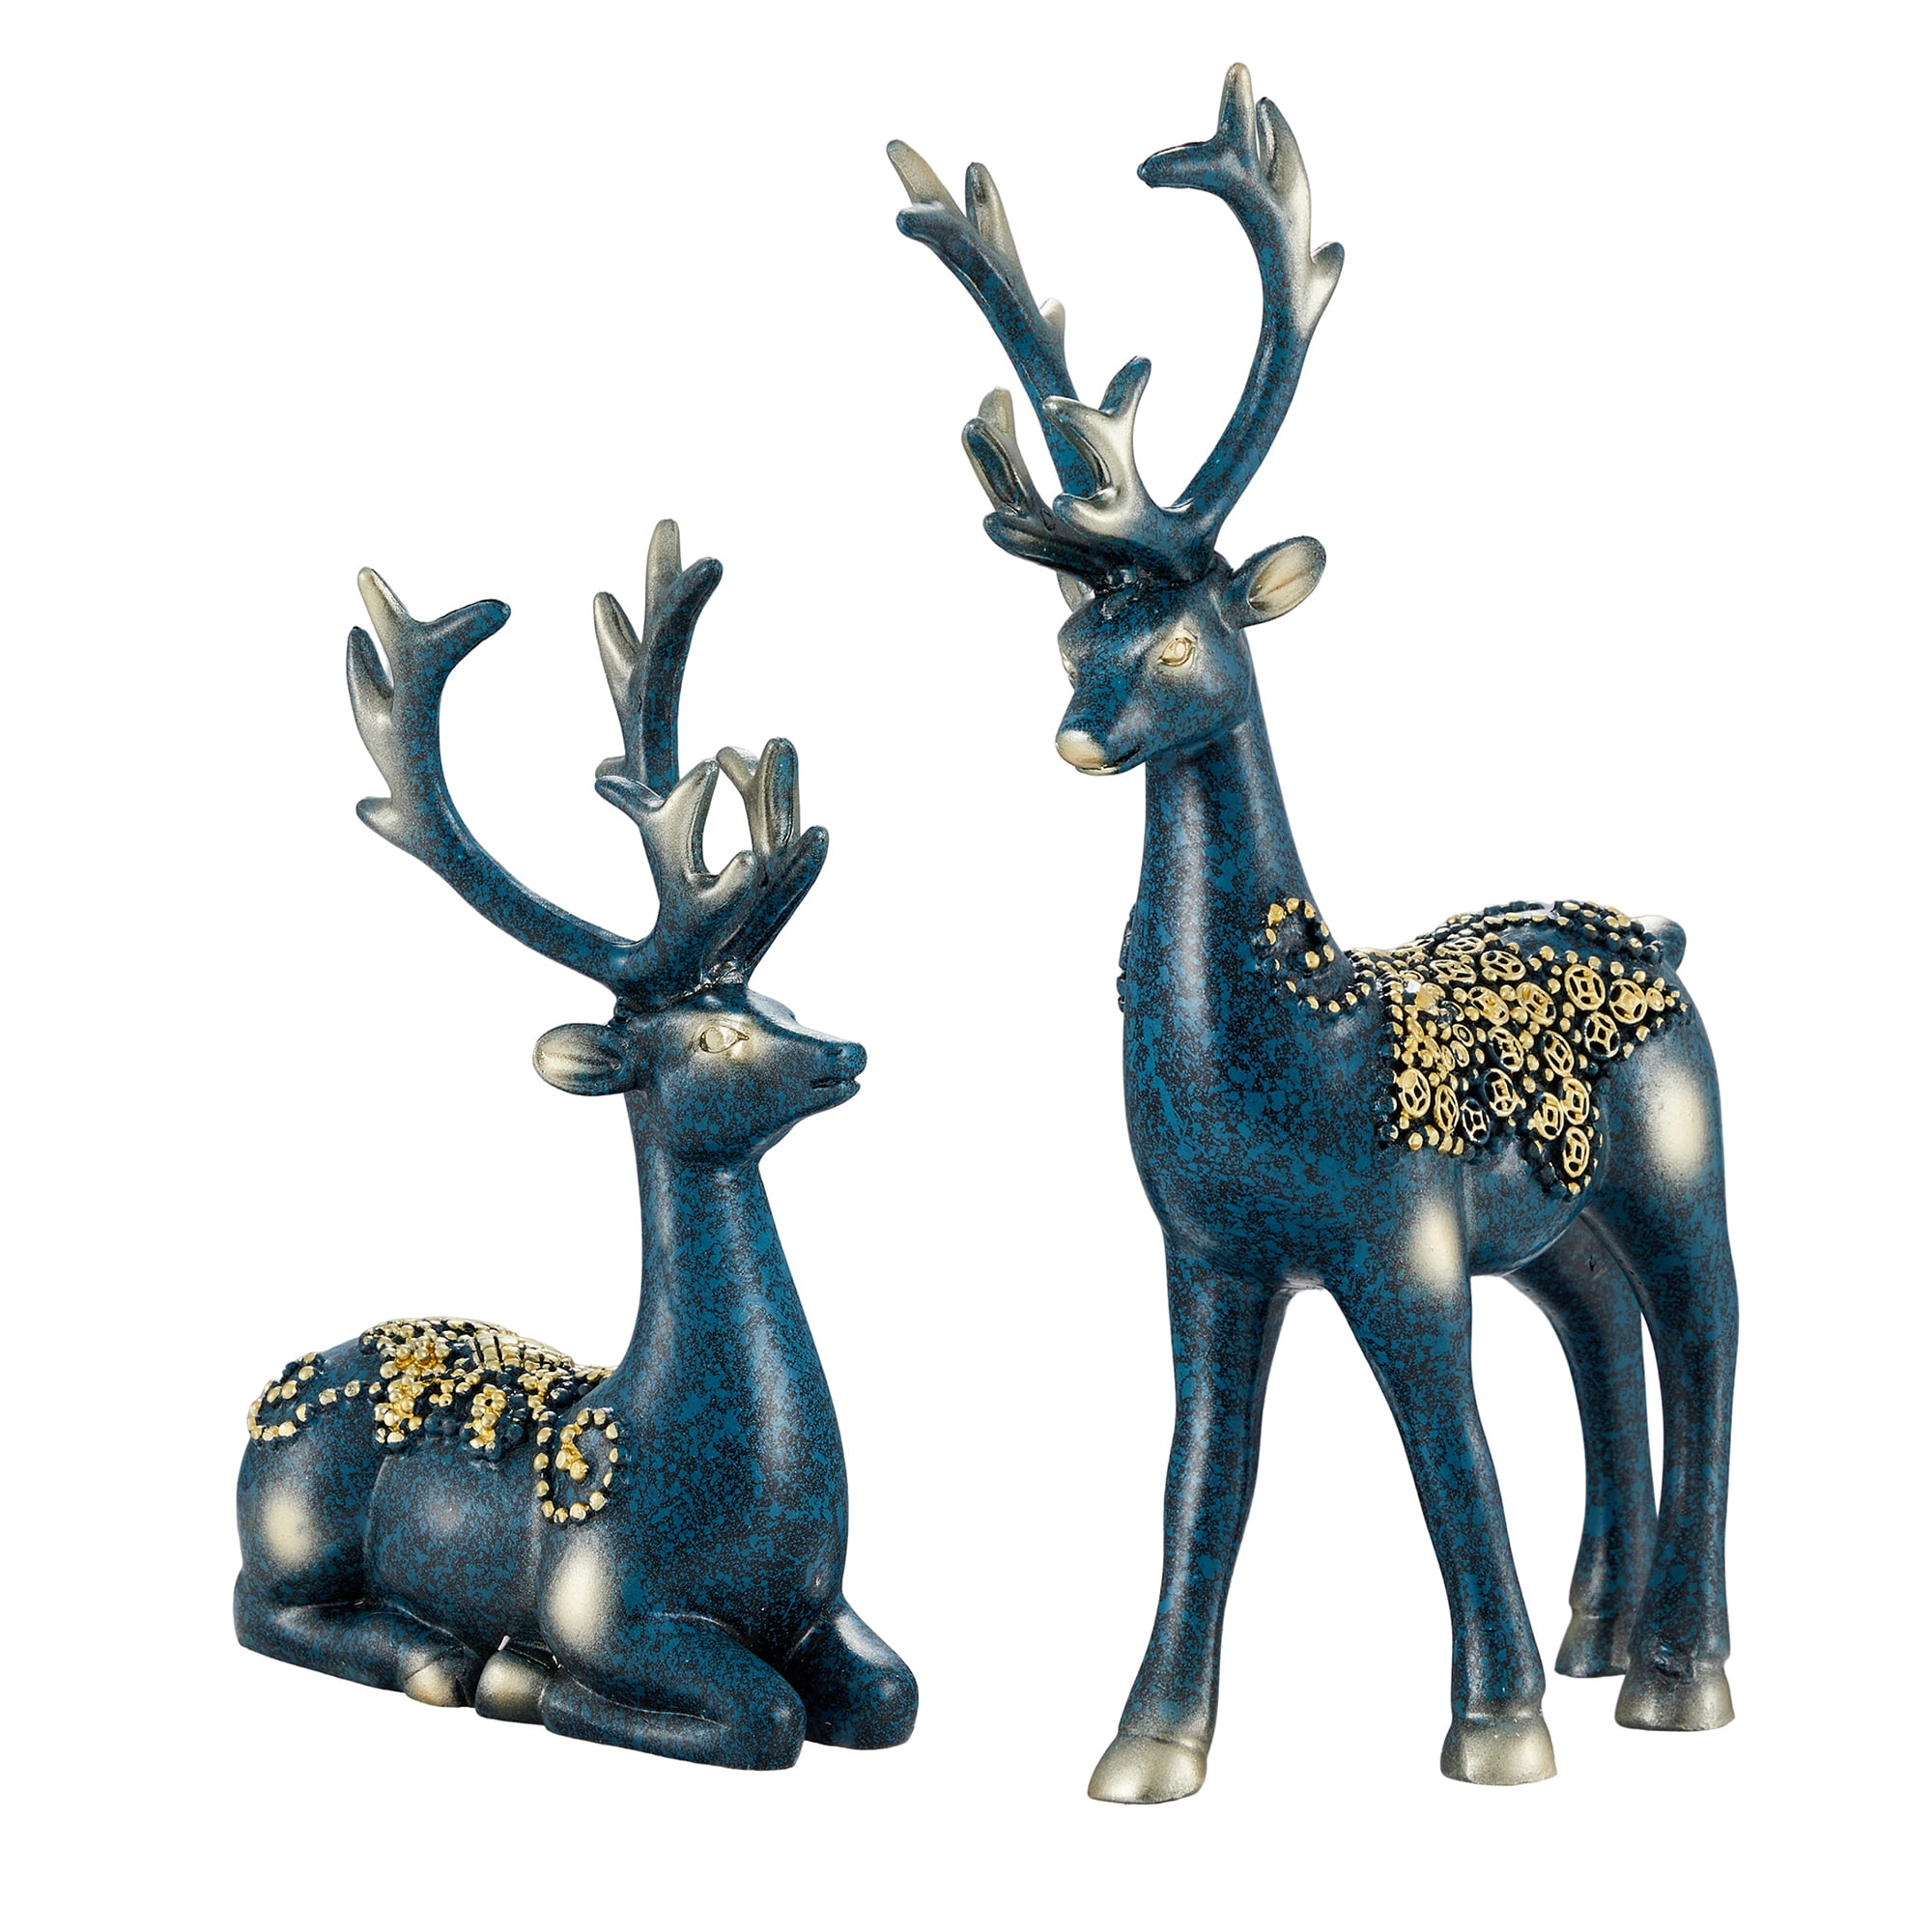  Arts and Crafts for Kids Ages 2-4 Table Reindeers Figurine  Statues Deluxe Christmas Deer Heavy Reindeers Ornaments for Home Decor  Accents Living Room Arts and Crafts for Kids Ages 8-12 (B